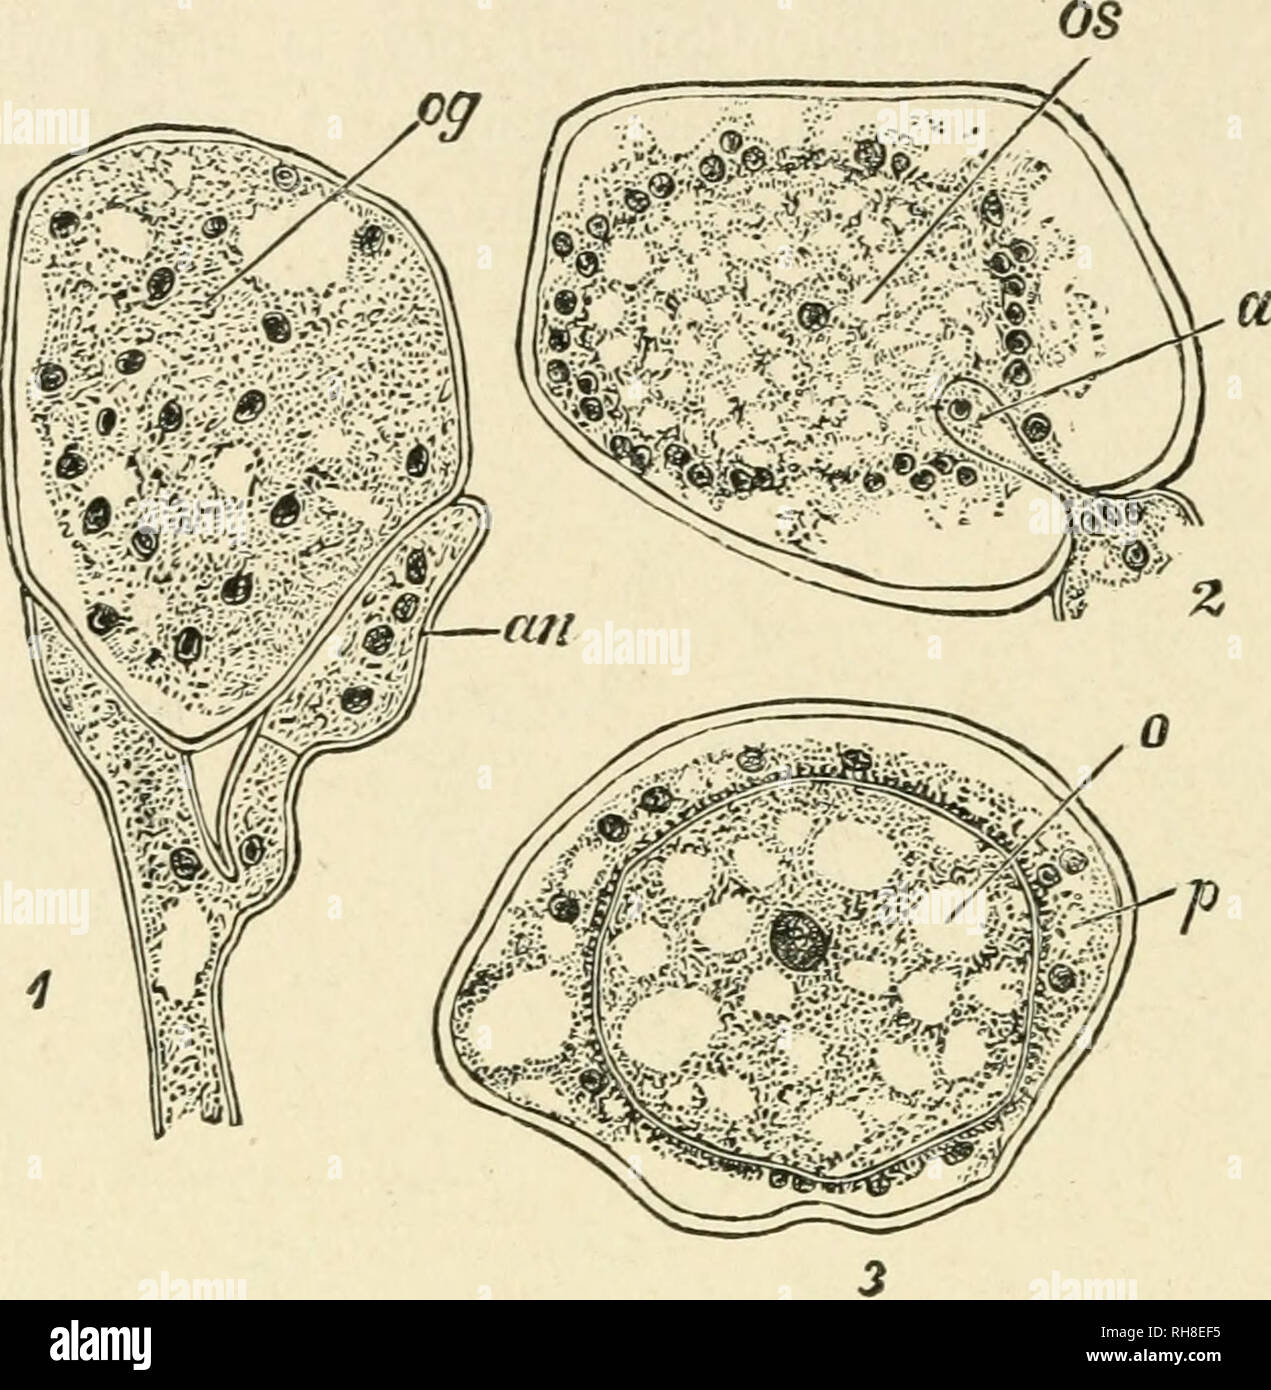 . Botany of the living plant. Botany. 422 BOTANY OF THE LIVING PLANT through the air. But it shows its real nature on germination by pro- ducing zoospores which are Hberated in water. The modification of. Fig. 357- |] Fertilisation of the Peronosporeae. i. Peronospora parasitica, young multi- '; nucleate oogonium (og), and antheridium (aw). 2. Albugo Candida. Oogonium with I' the central, uni-nucleate egg {os), and the fertiUsing tube (a) of the antheridium which I ^ introduces the male nucleus. 3. The same. The fertilised egg (0) surrounded bj^ periplasm (/&gt;). (After Wager. x666.) (From St Stock Photo